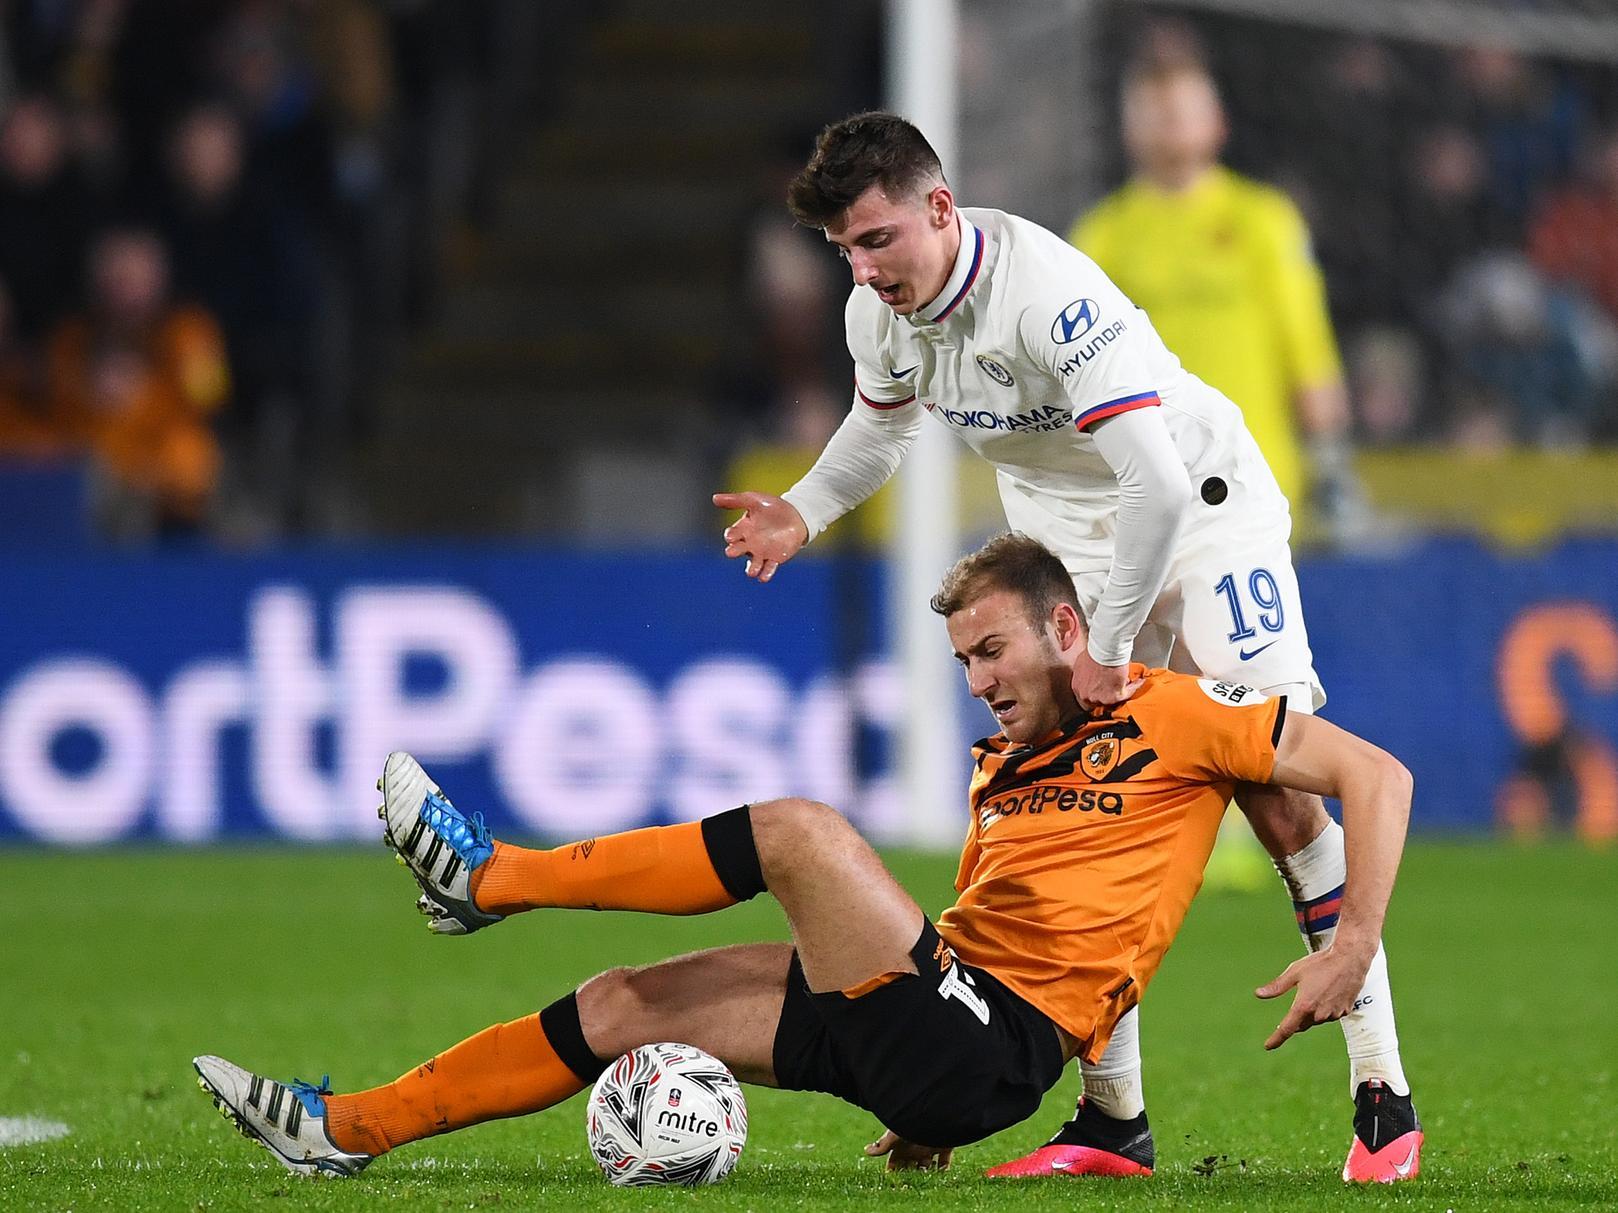 Hull City could be without both Herbie Kane and Eric Lichaj for the rest of the season, after manager Grant McCann confirmed that both players have suffered torn ankle ligament injuries. (Hull Daily Mail)